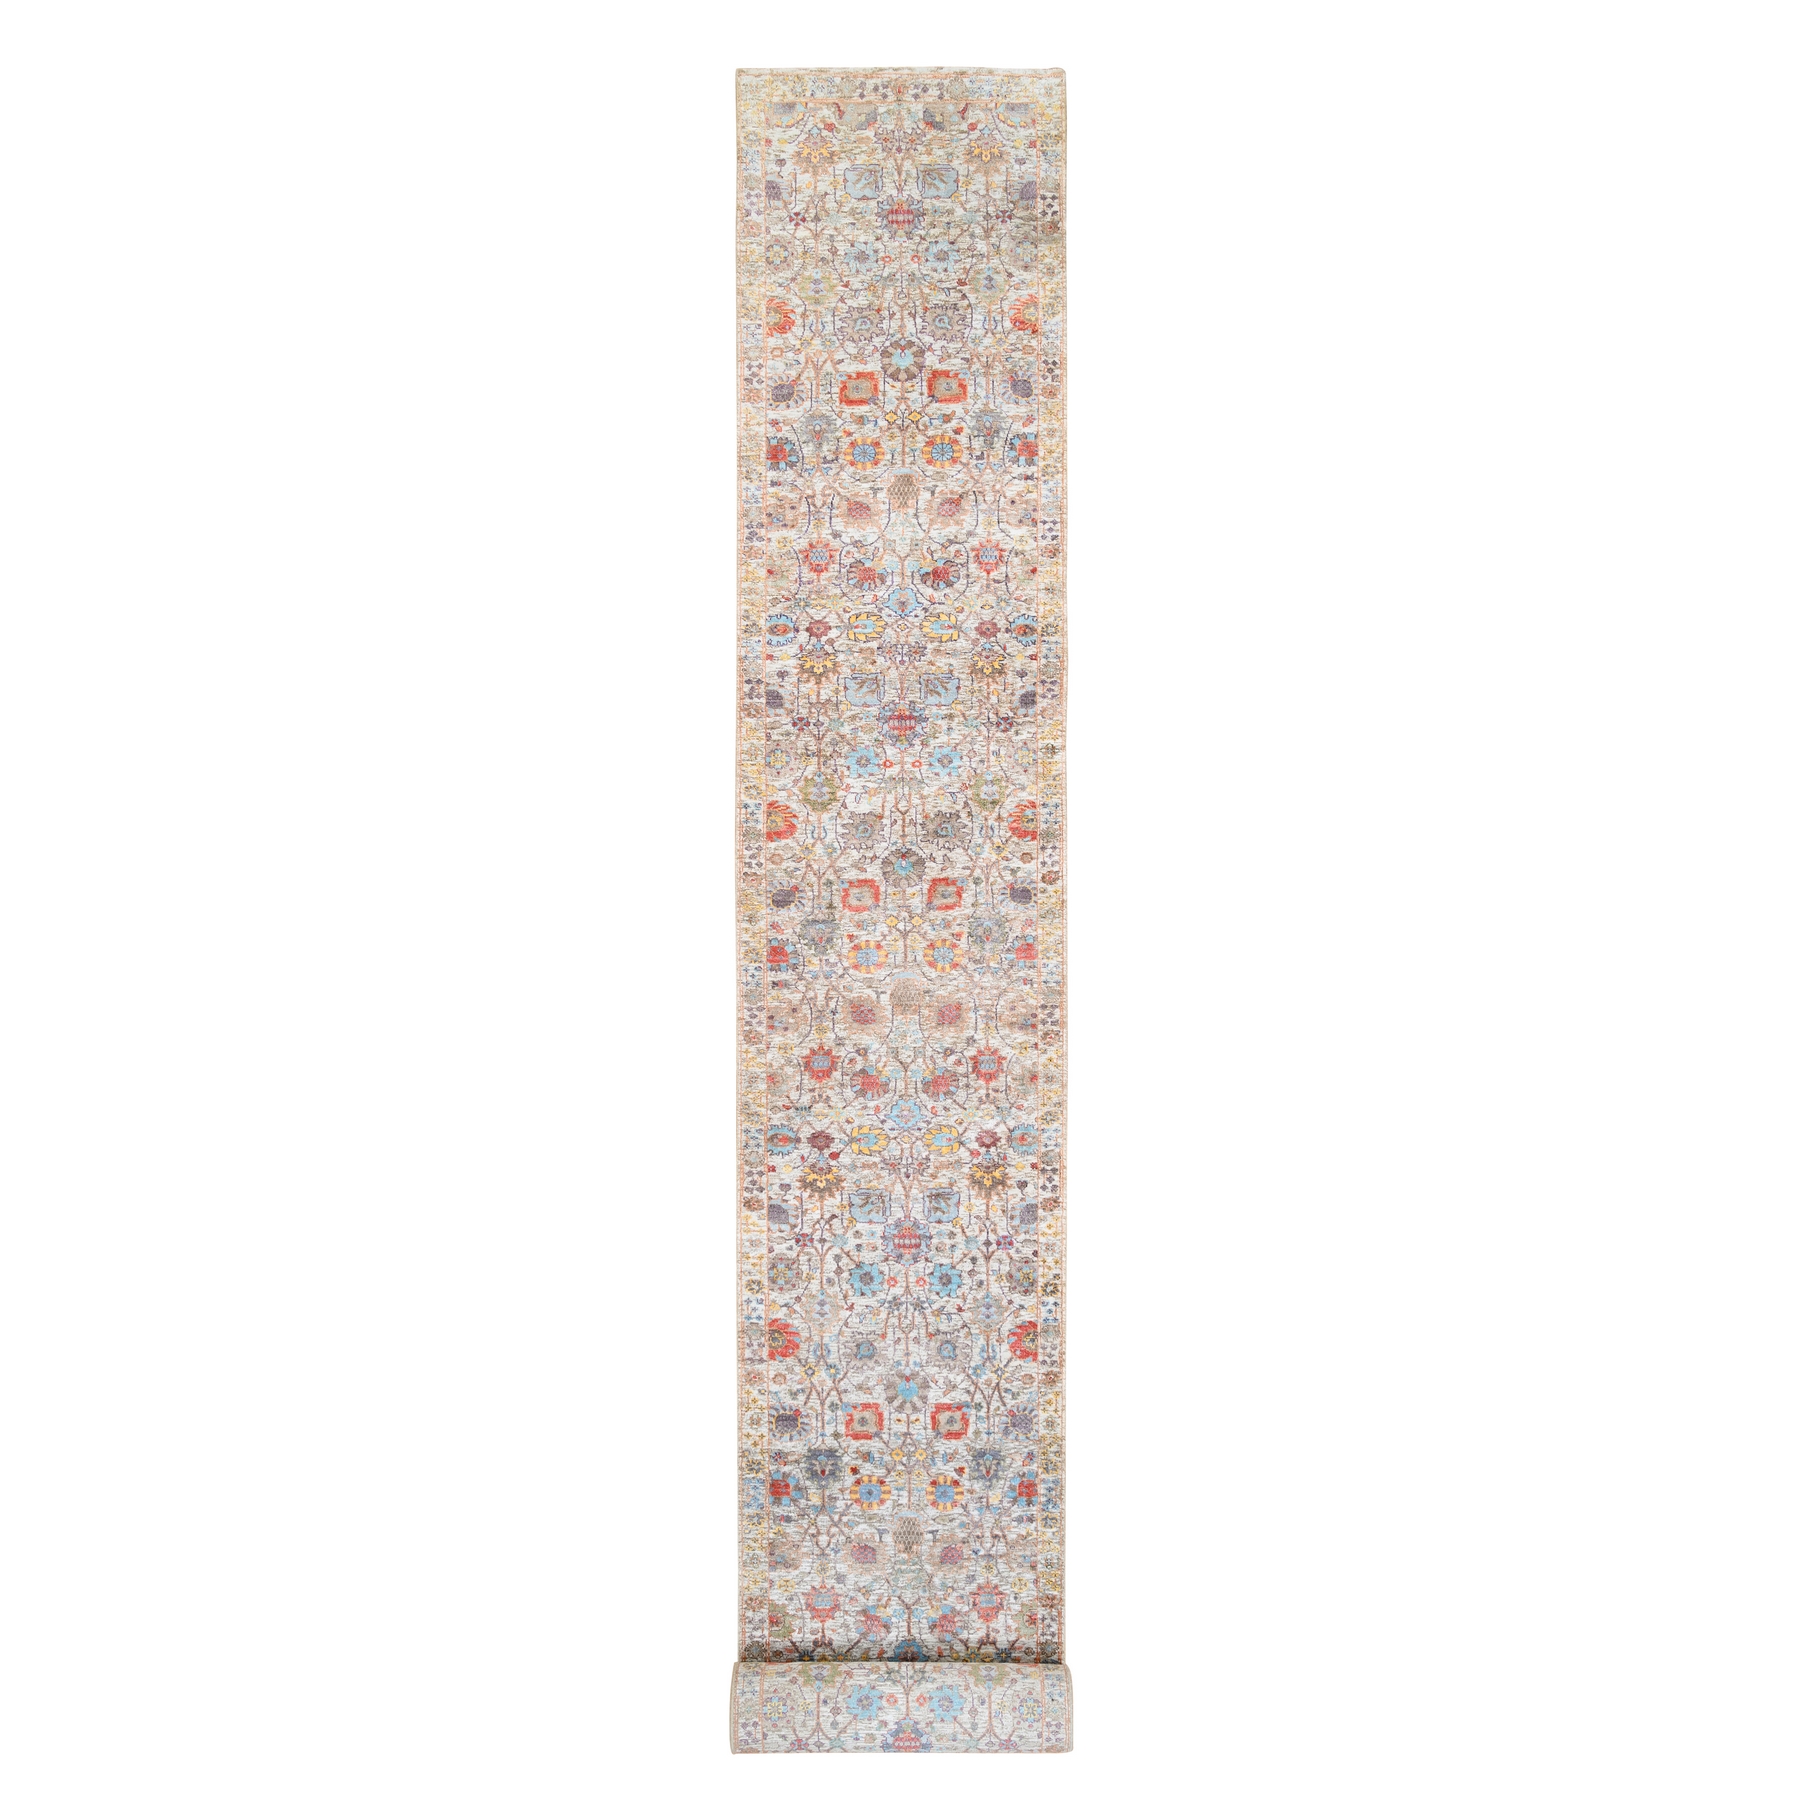 2'8"x23'10" Hand Woven Ivory Tabriz Vase With Flower Design Colorful Silk With Textured Wool Oriental XL Runner Rug 